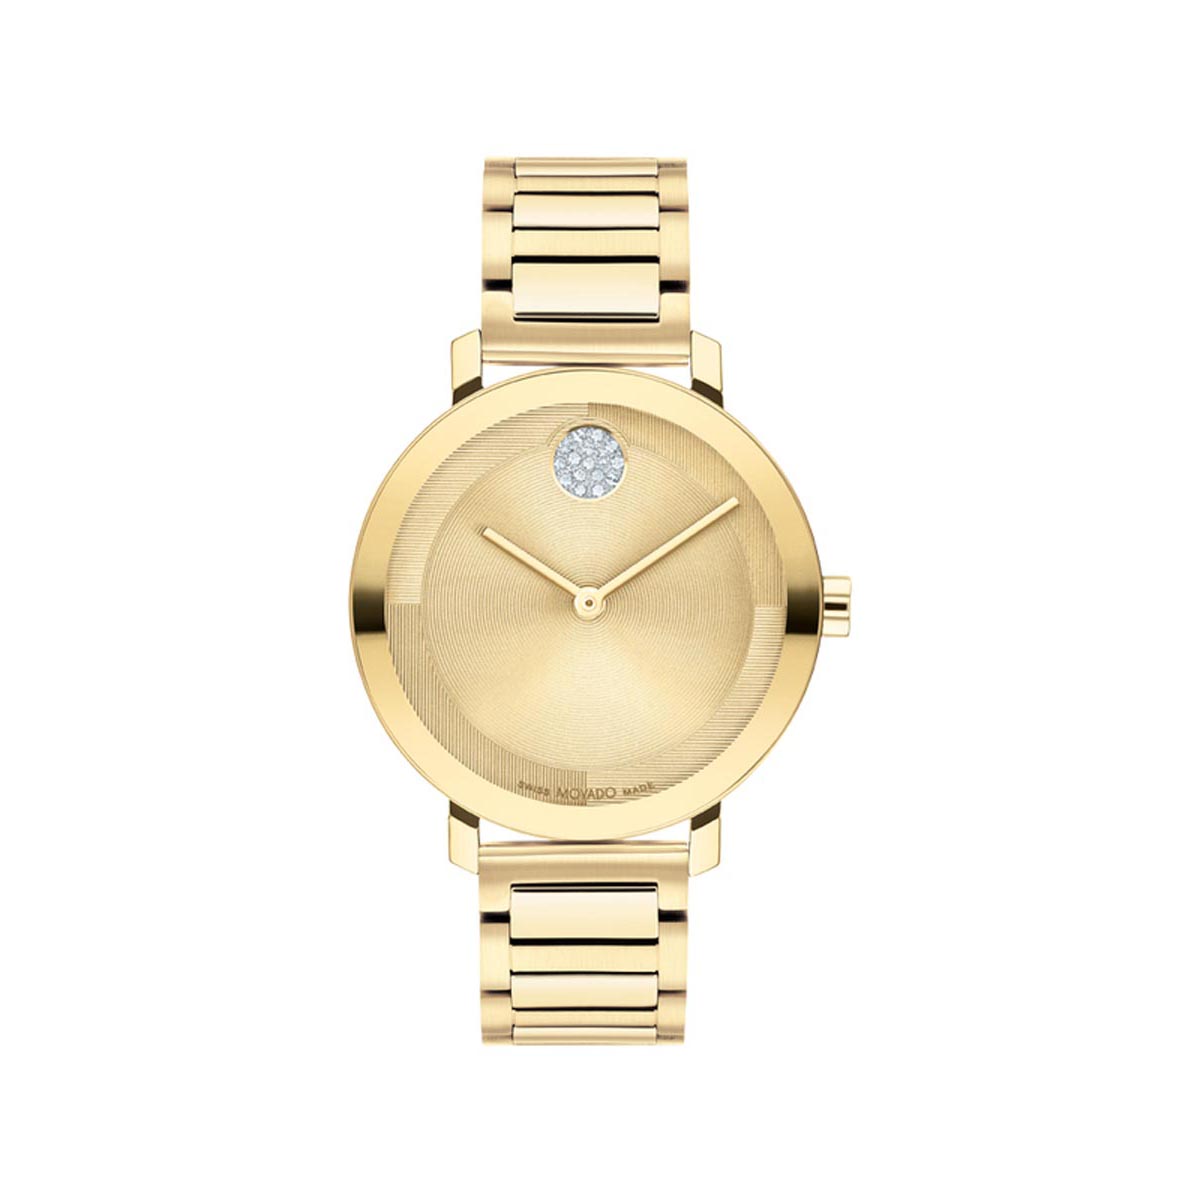 Movado Bold Evolution 2.0 Womens Crystal Watch with Yellow Dial and Yellow Ion Plated Stainless Steel Bracelet (Swiss quartz movement)